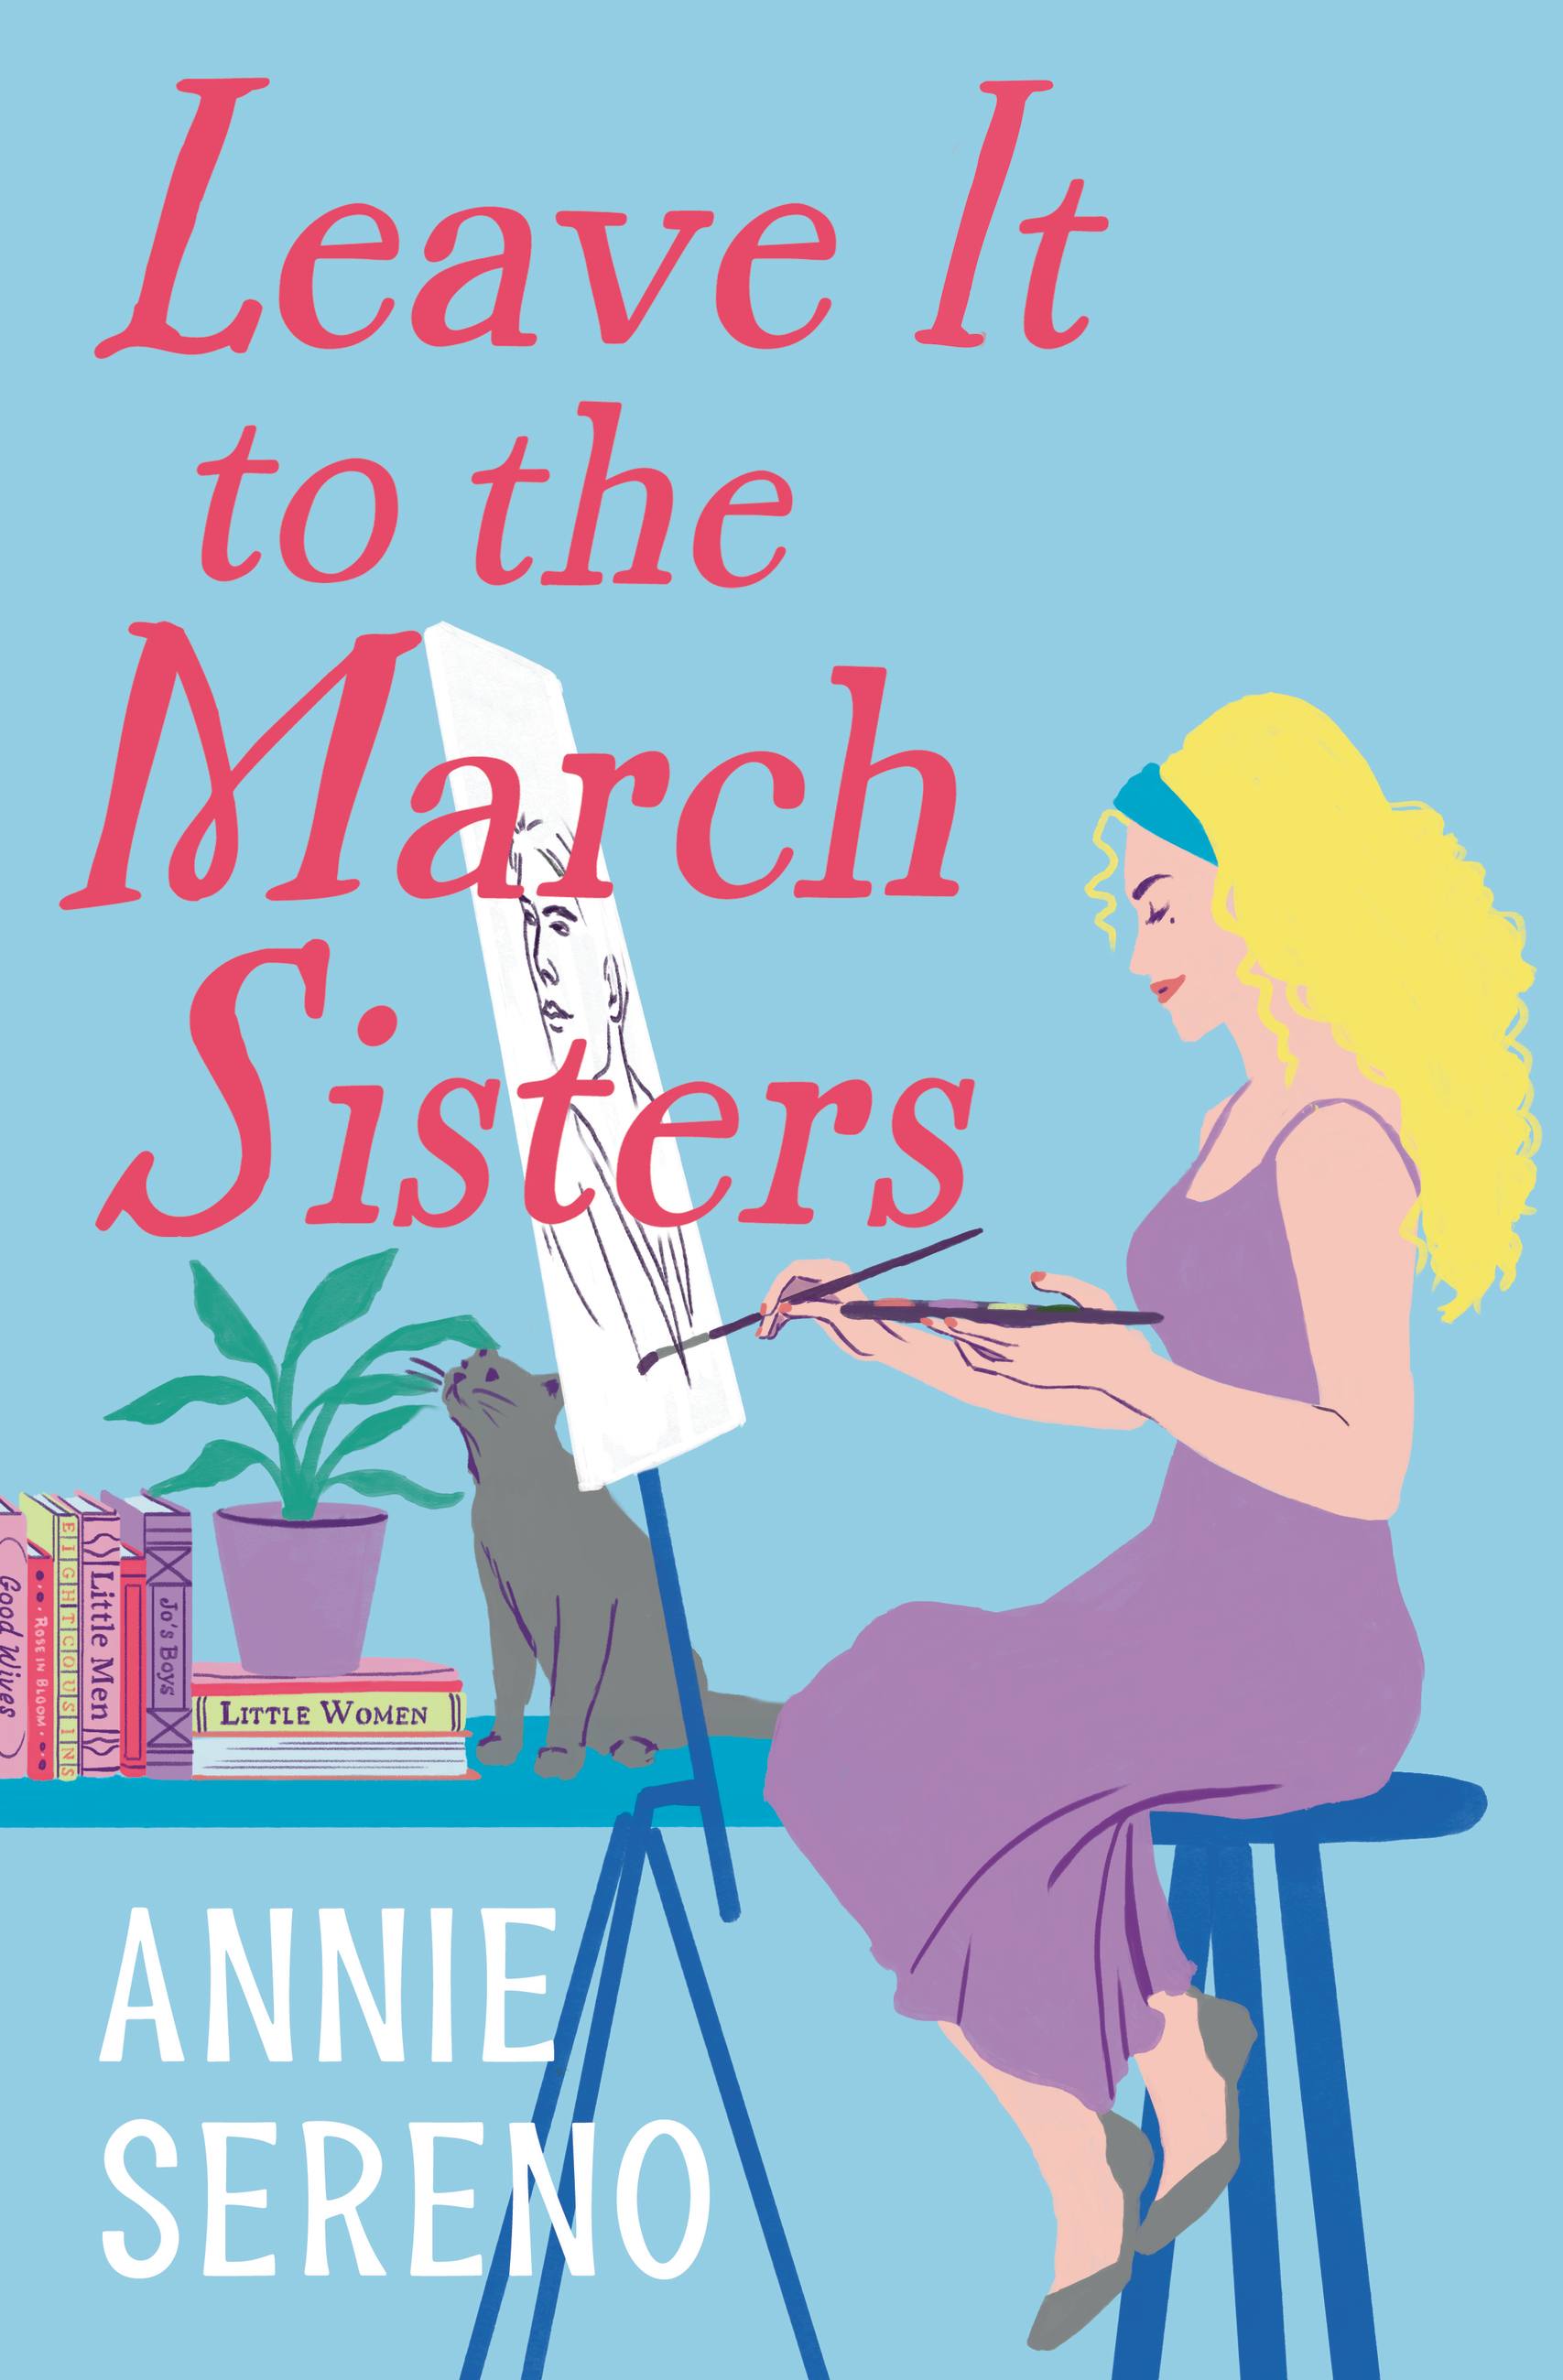 Shy Young Amateur Girl - Leave It to the March Sisters by Annie Sereno | Hachette Book Group